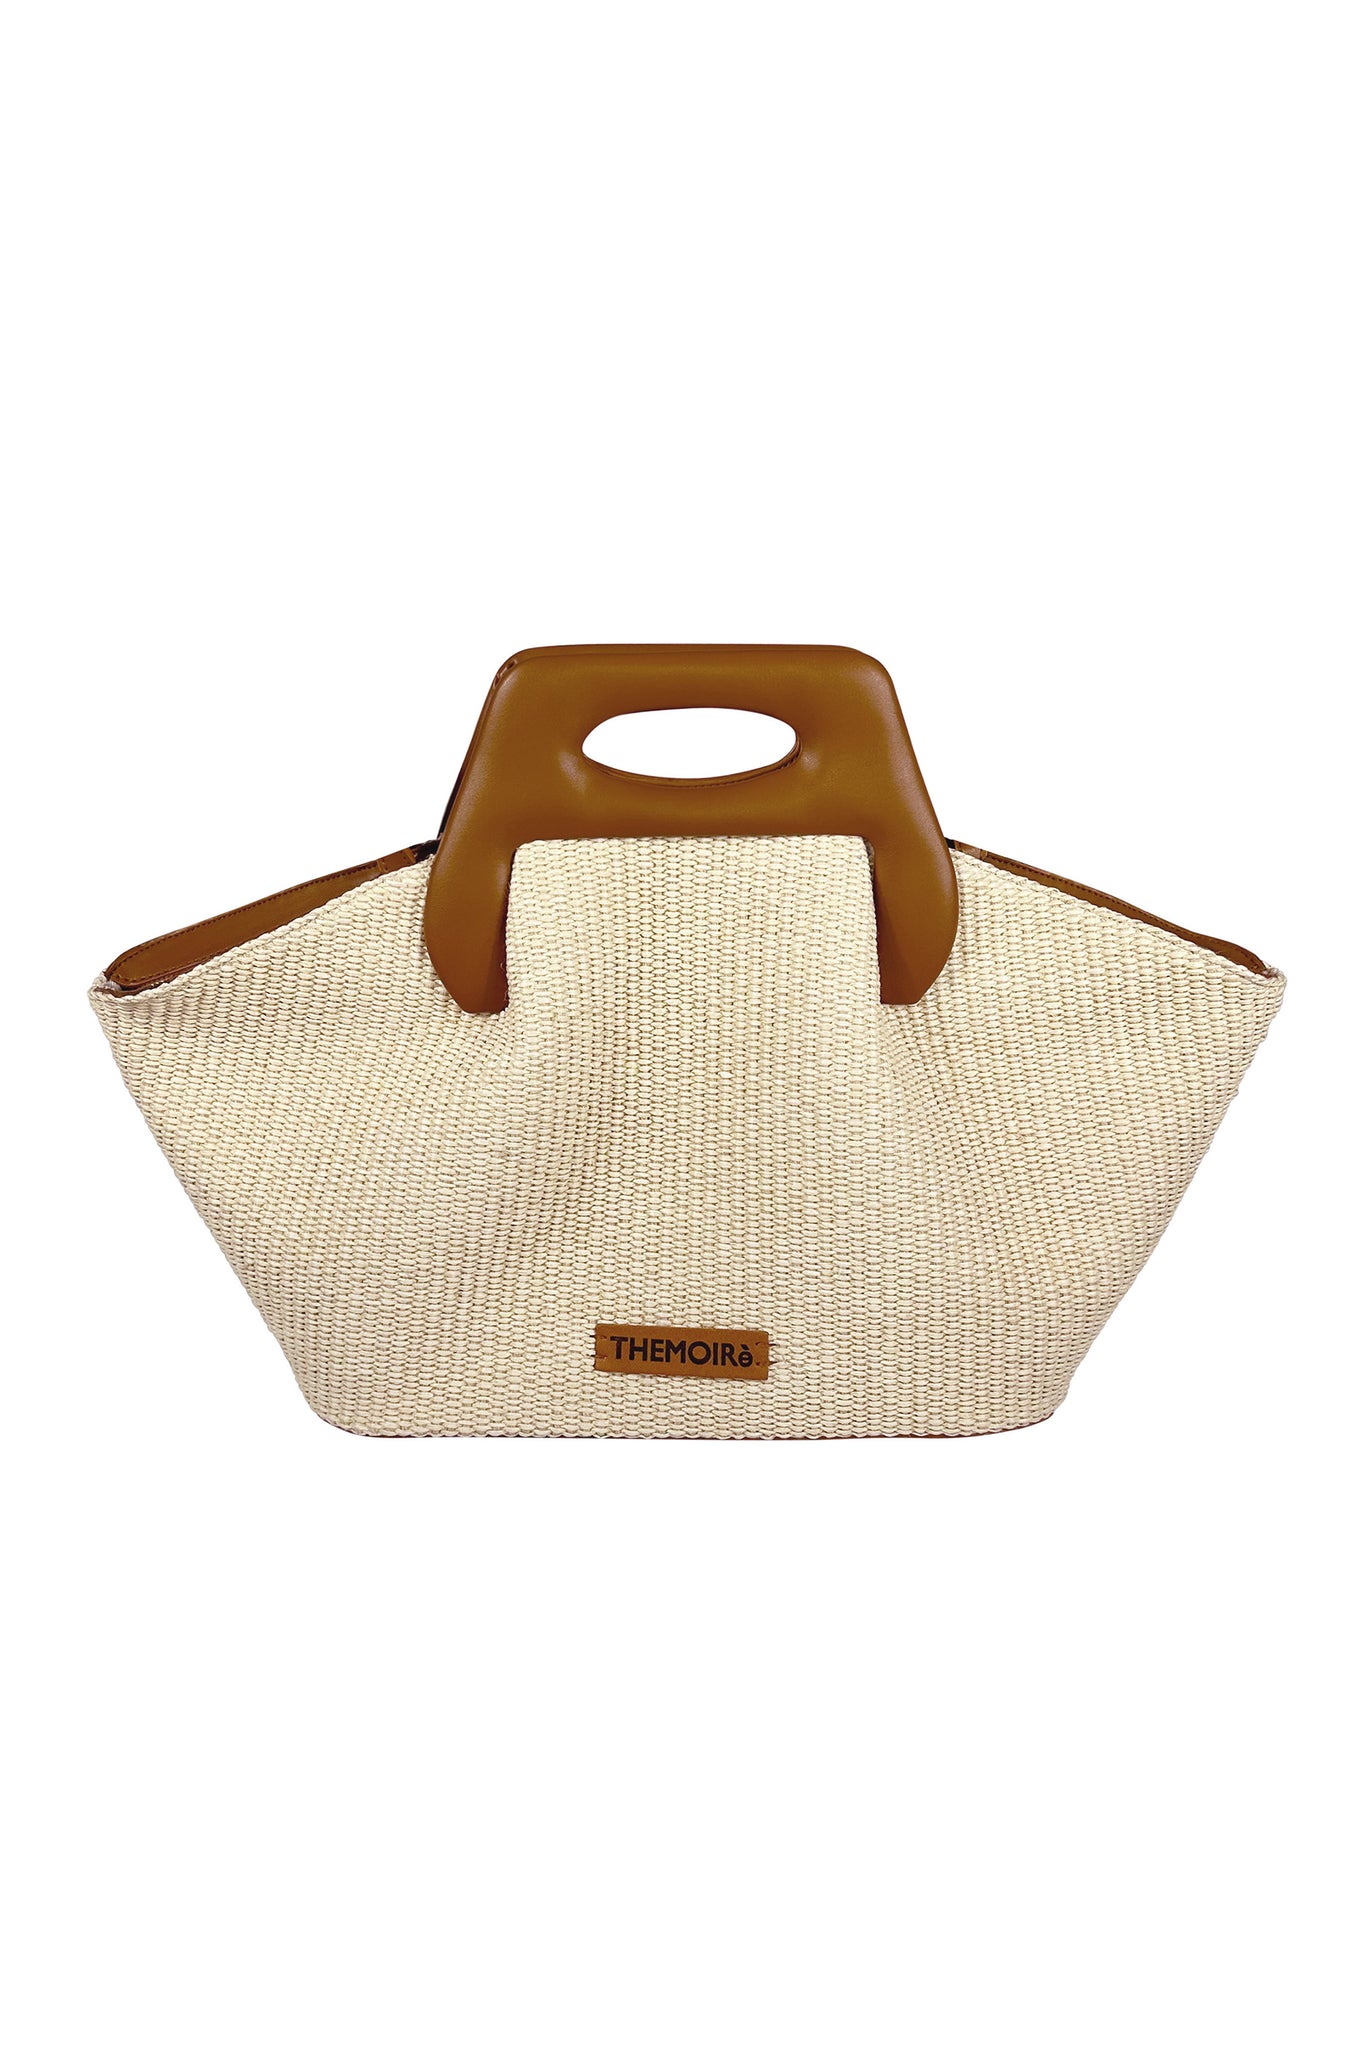 THEMOIRè Dhea Straw Tote Bag in Shell and Caramel